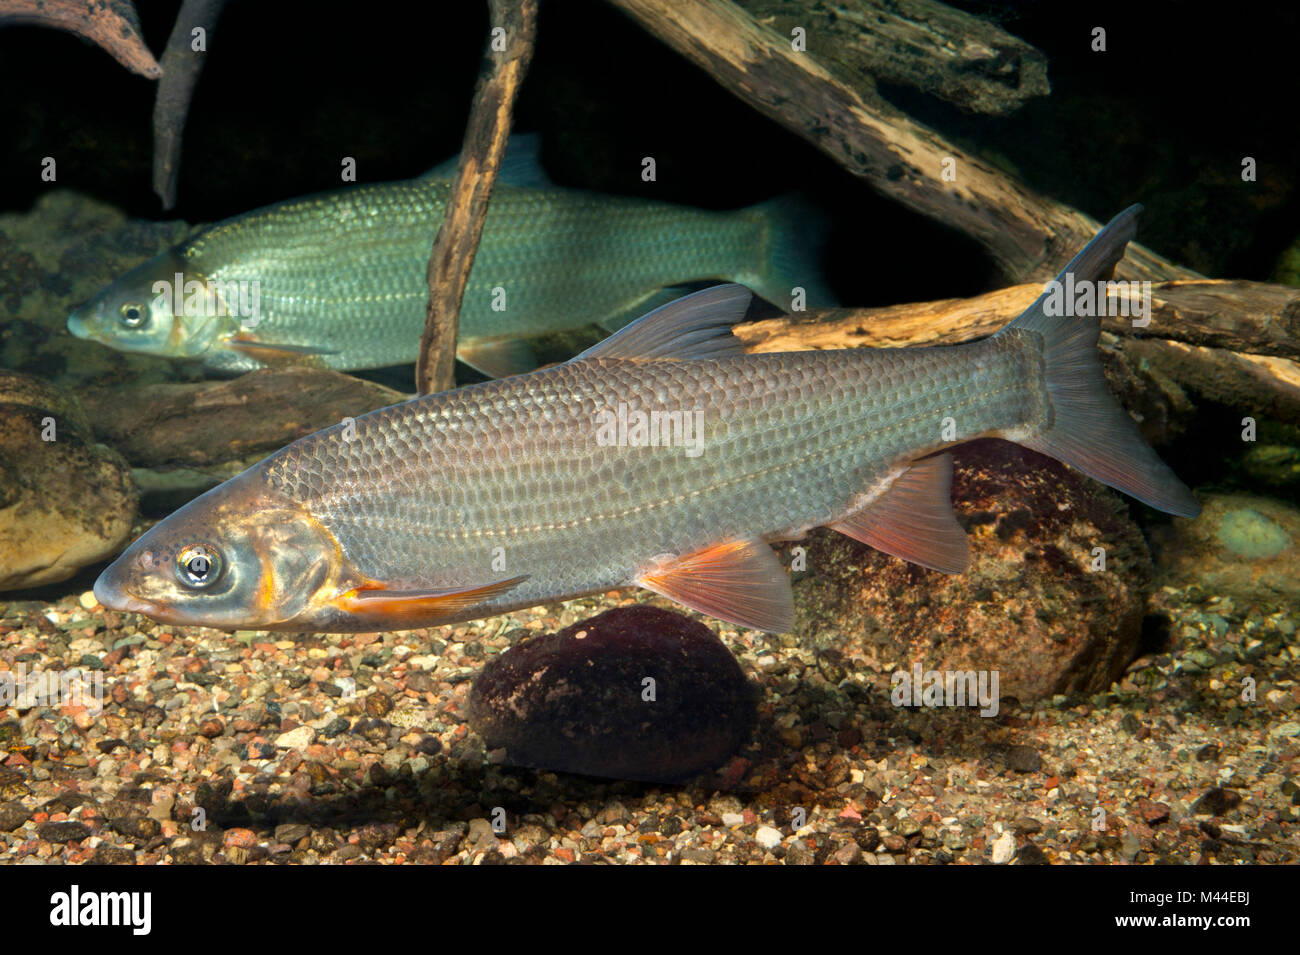 Common Nase (Chondrostoma nasus). Two adults under water. Germany Stock Photo